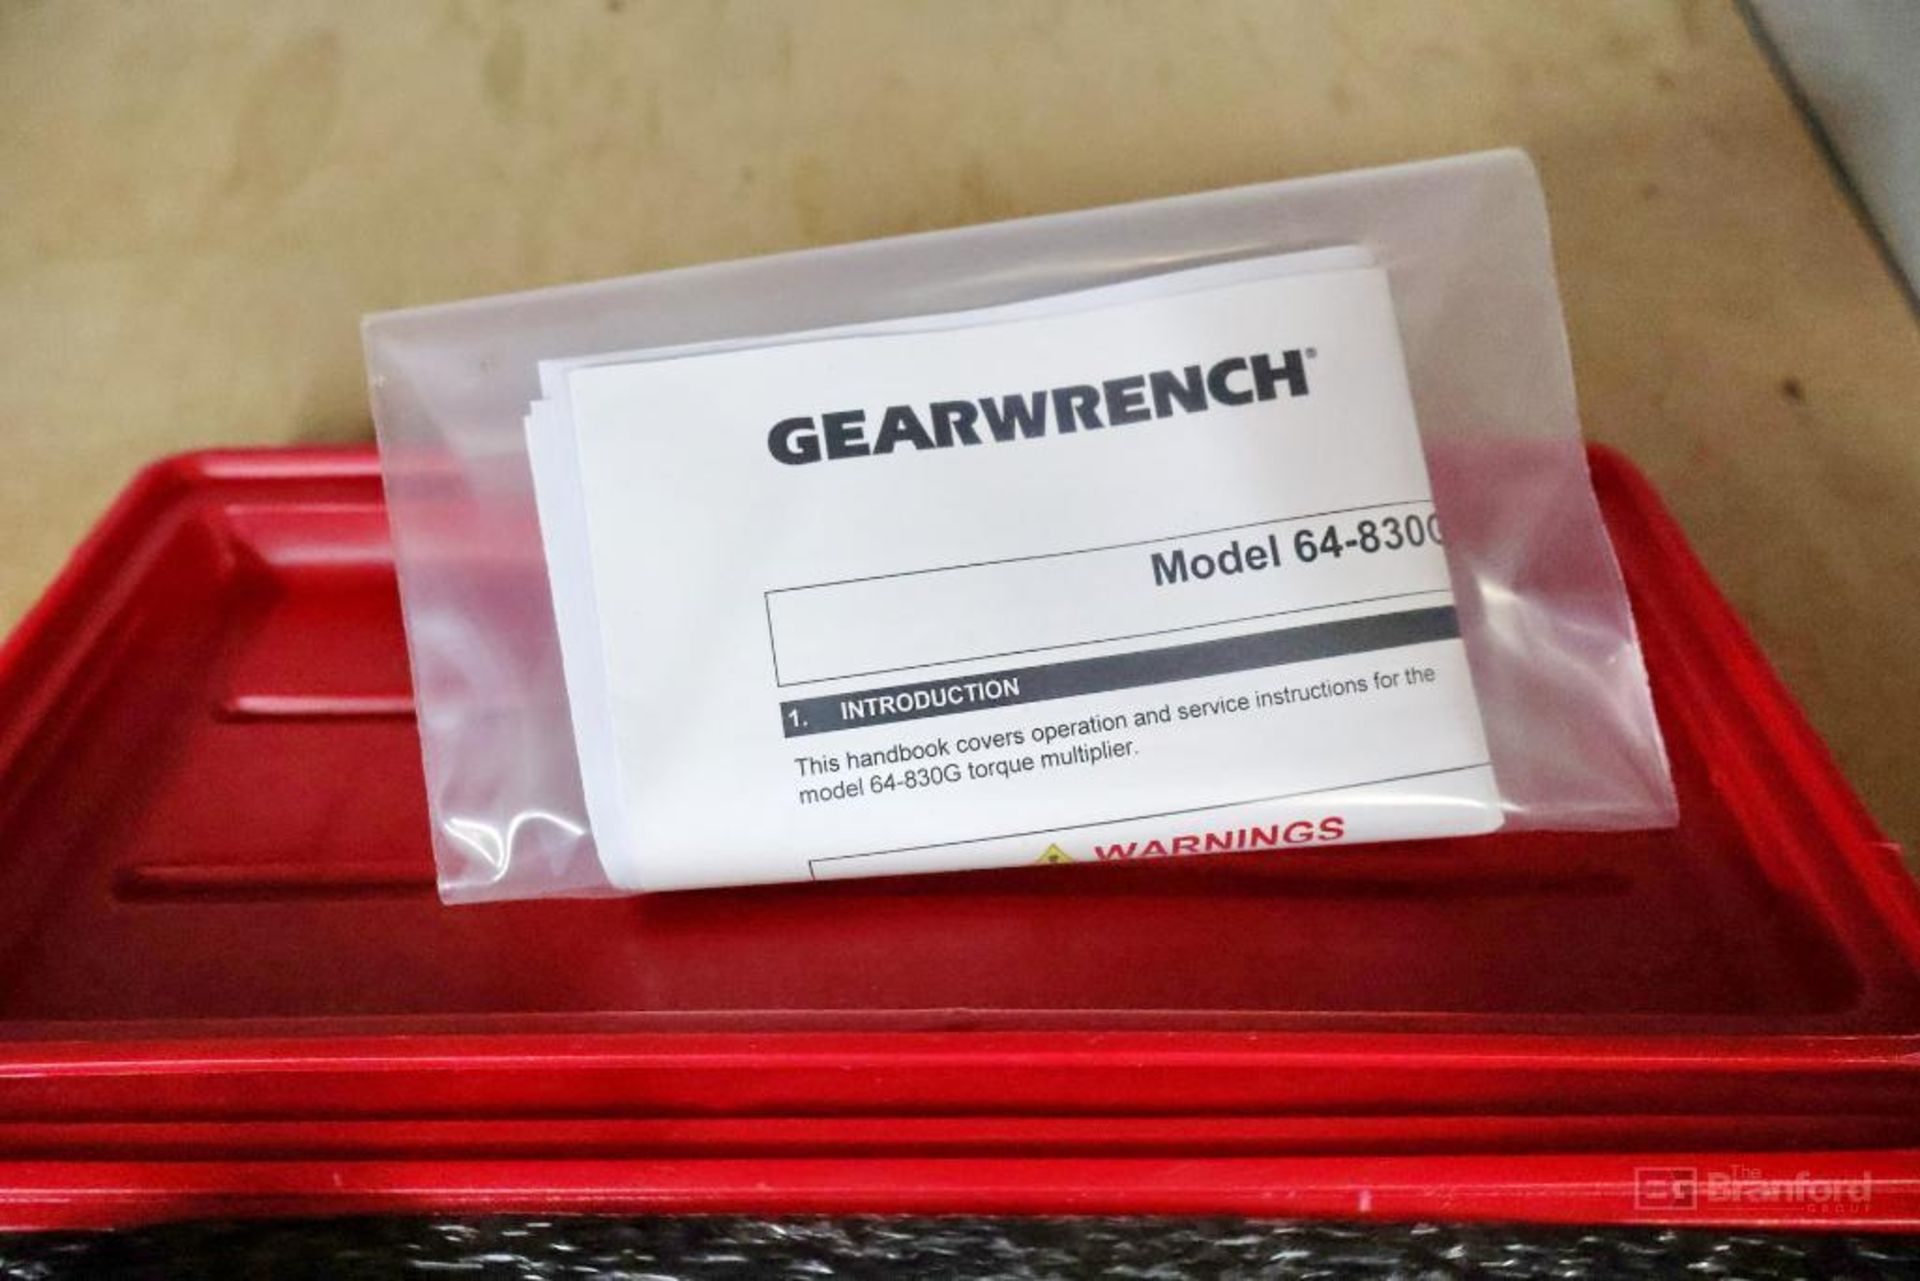 GearWrench 64-830G Torque Multiplier - Image 3 of 4